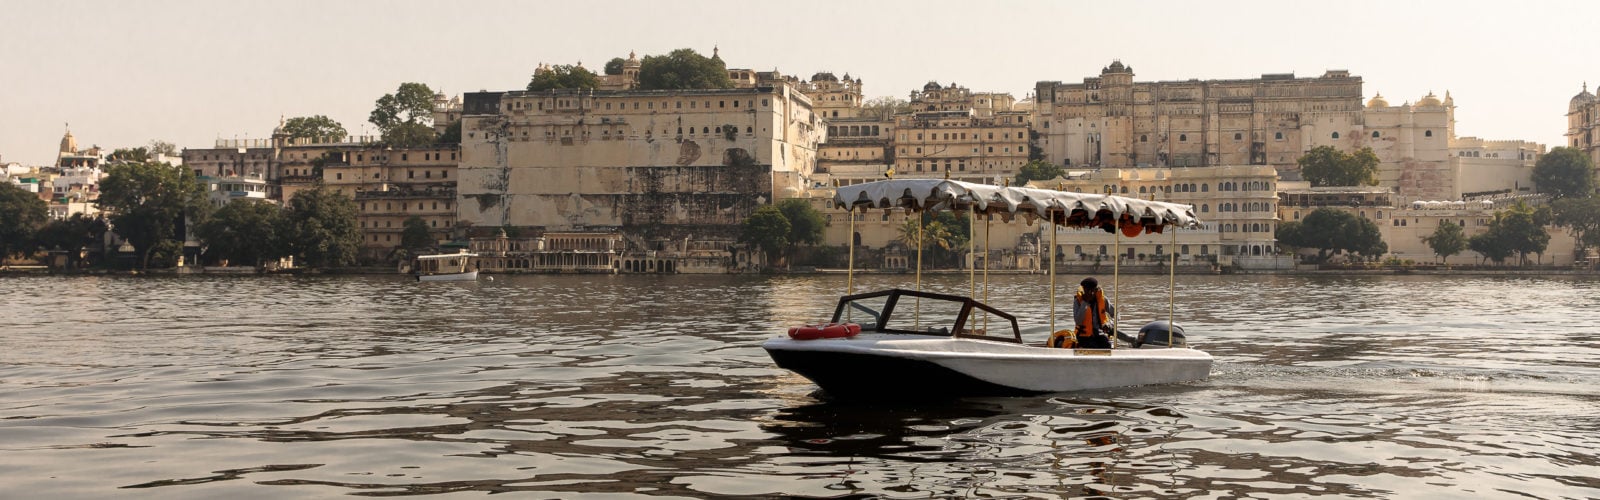 lucy-laucht-udaipur-lake-boat